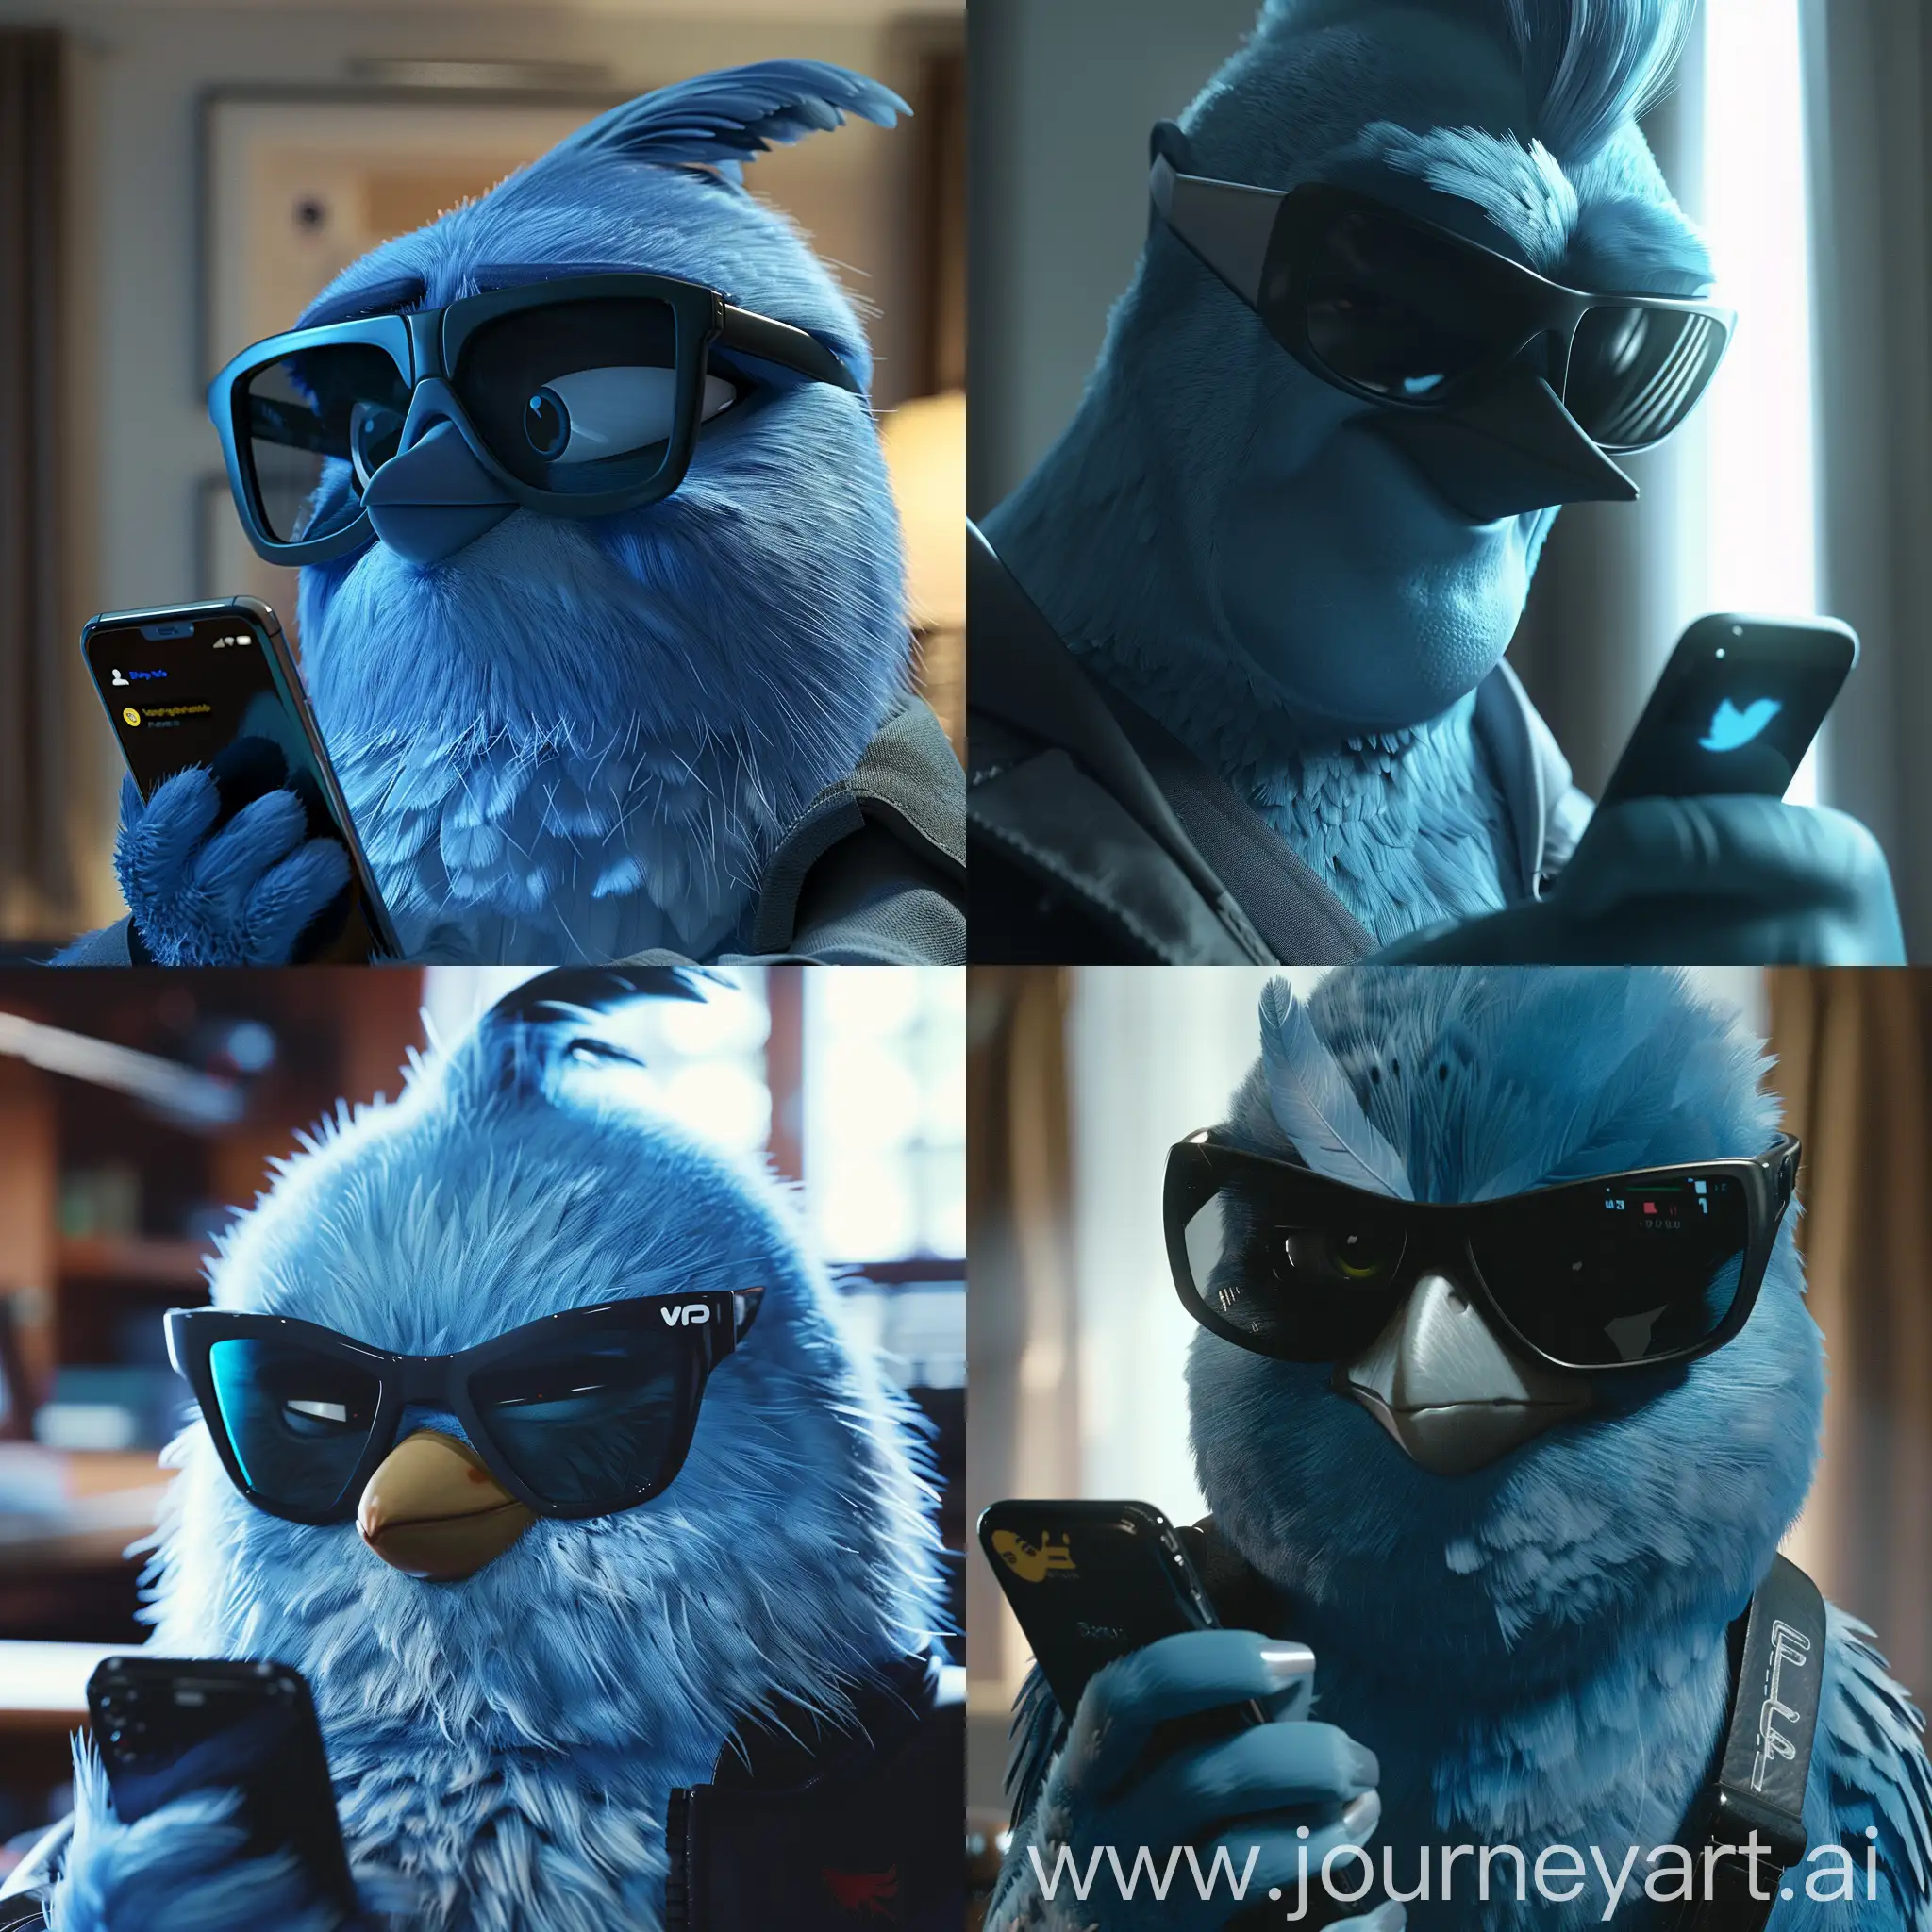 The Blue Bird from Twitter X, cool and stern look, black sunglasses, stares into the screen and shows his phone, style Pixar 